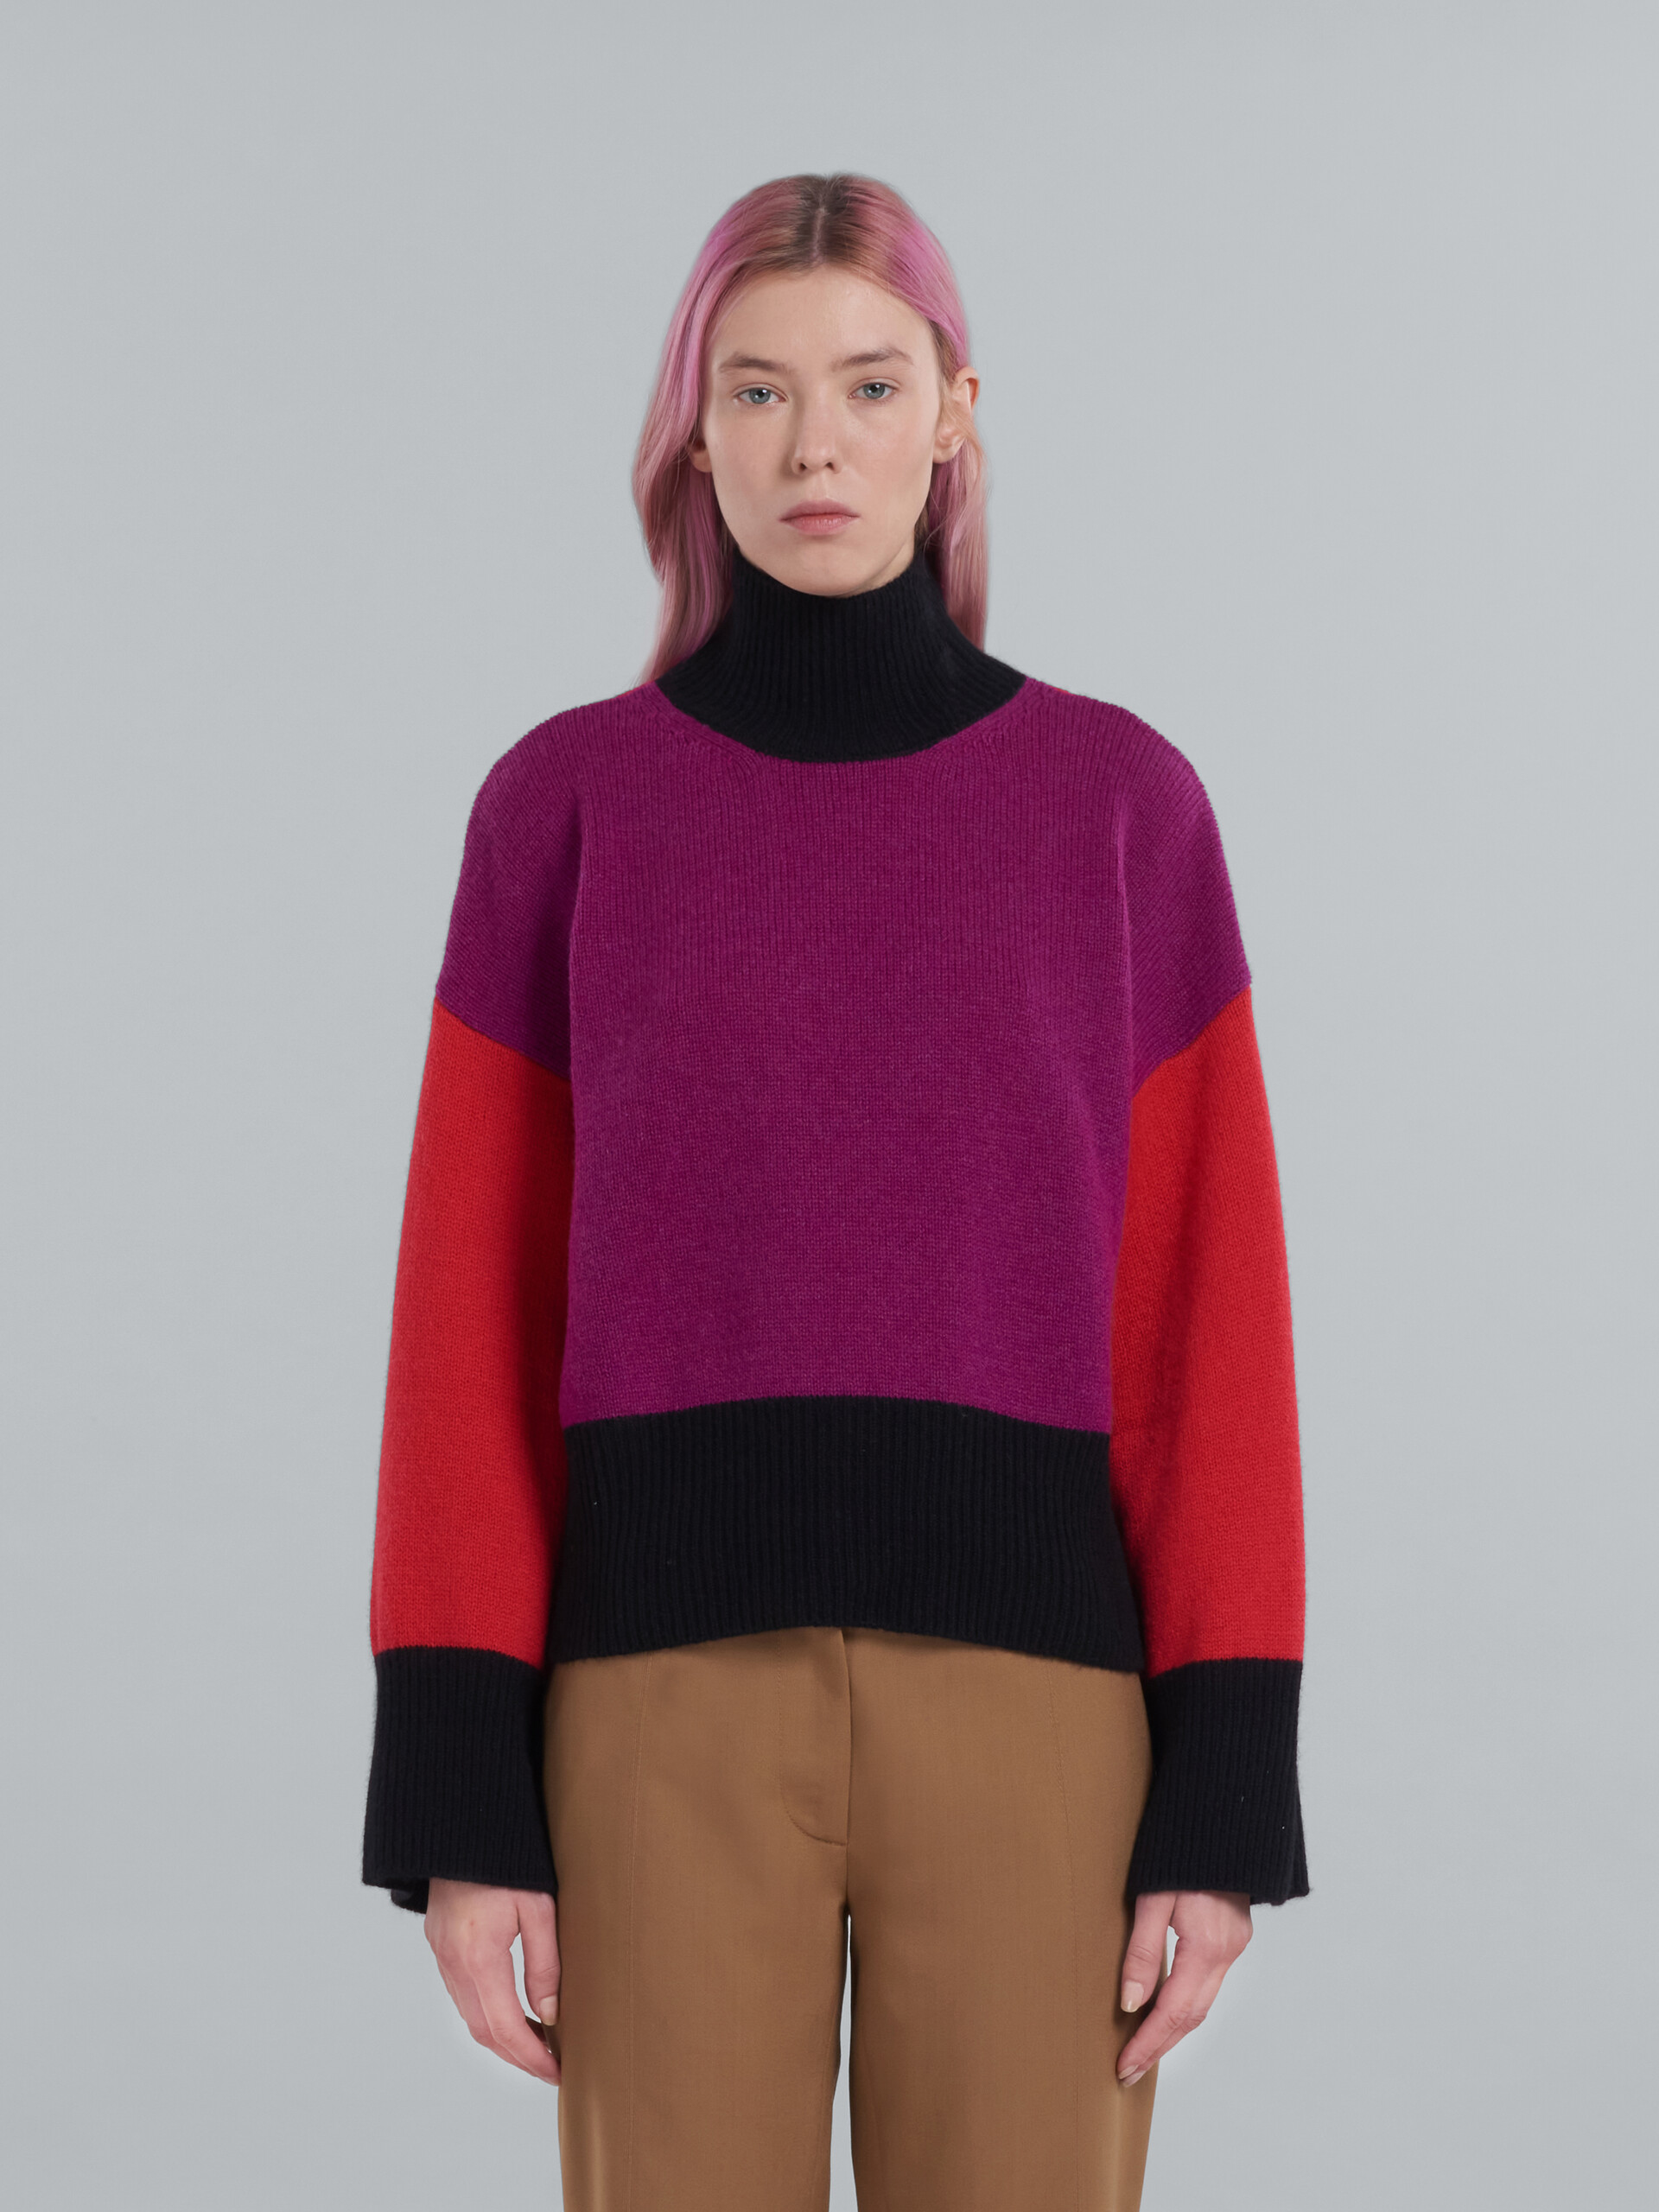 Cashmere cropped T-neck sweater - Pullovers - Image 2